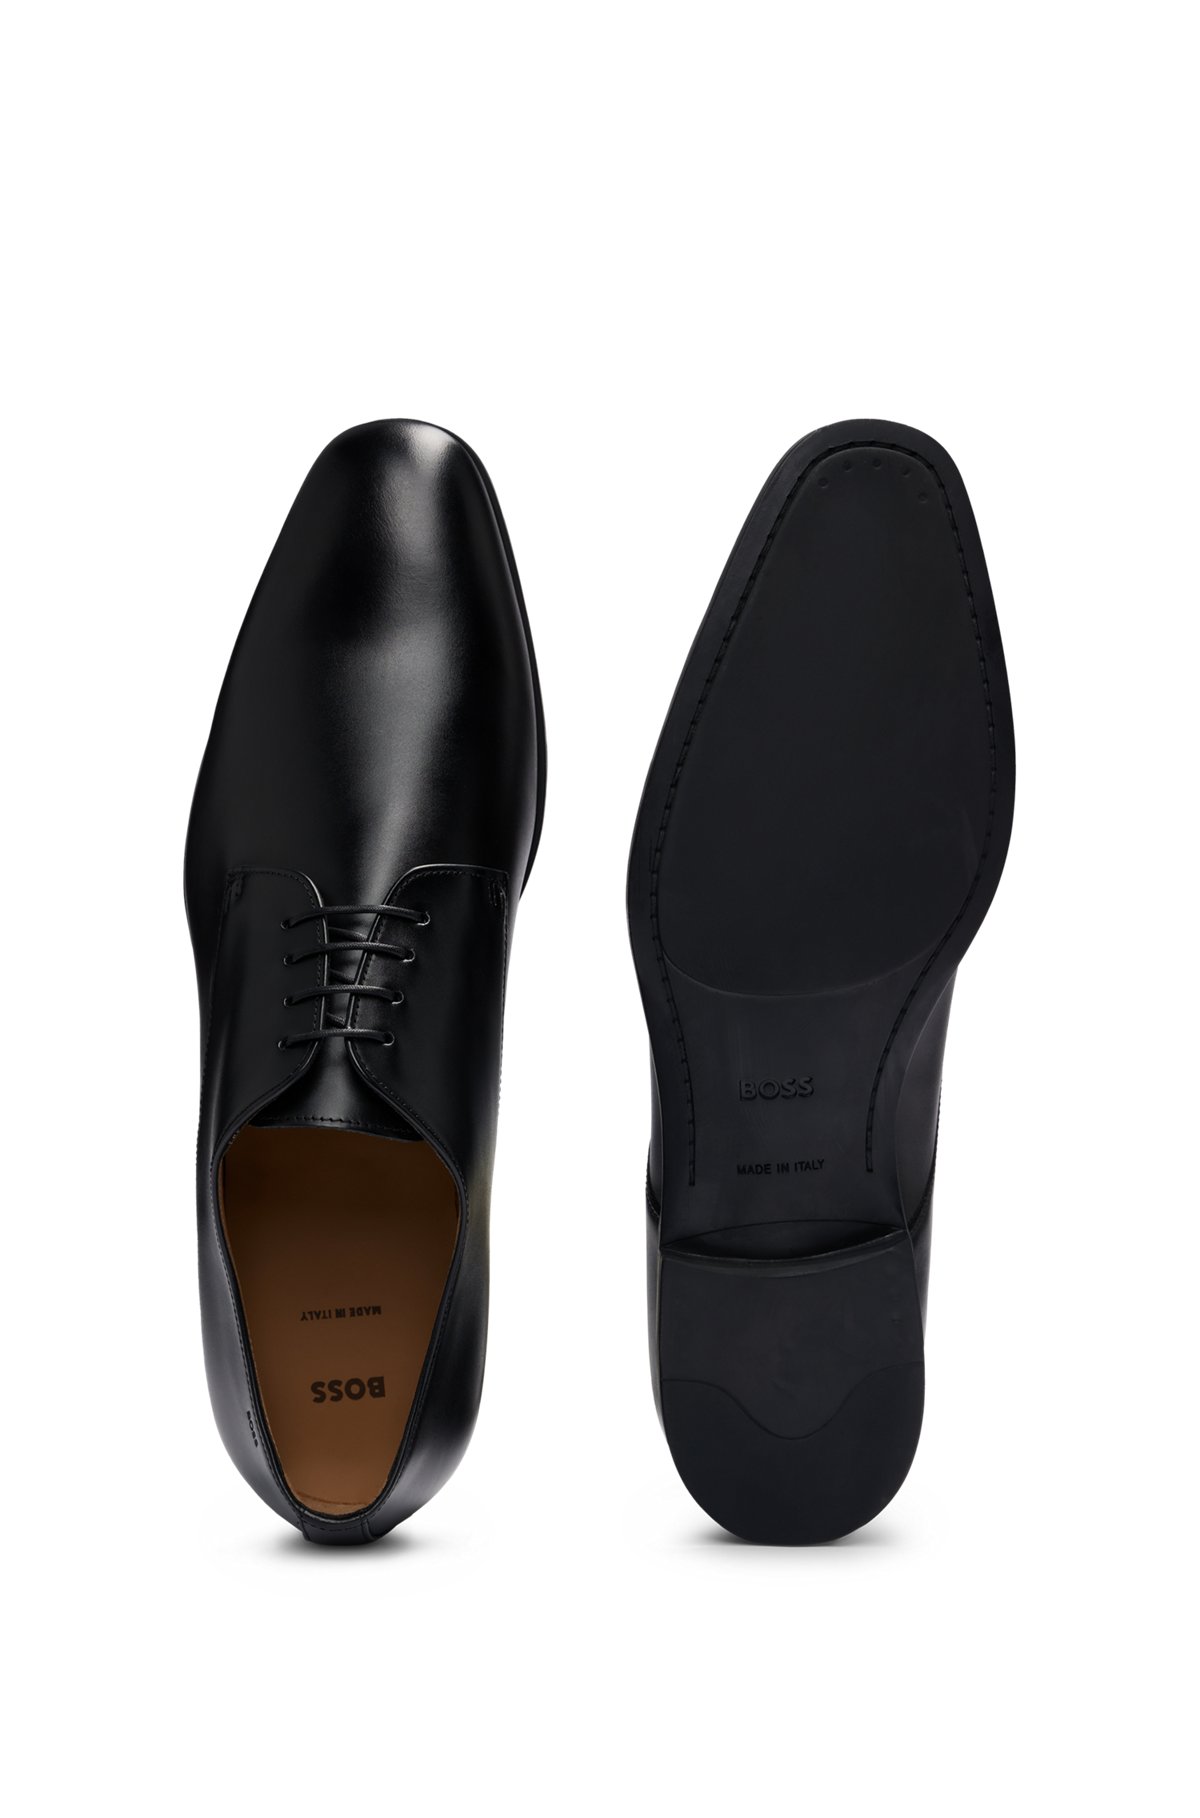 Leather Derby shoes with rubber sole, Black